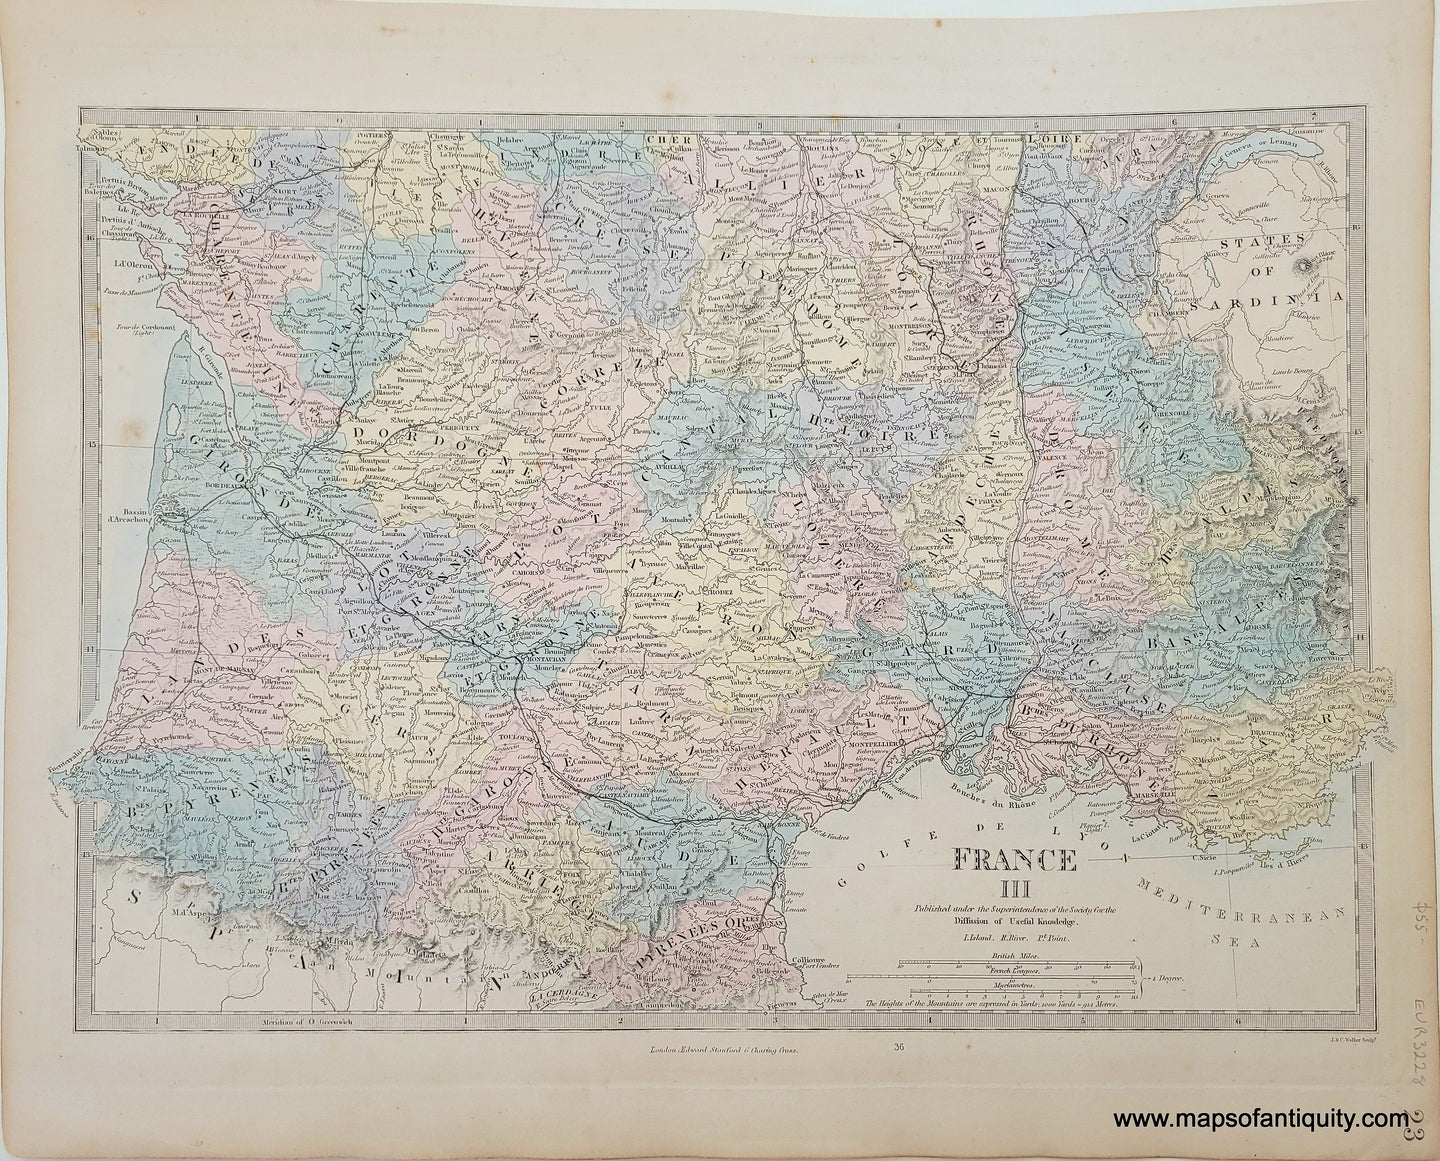 Genuine-Antique-Map-France-III-France--1860-SDUK-Society-for-the-Diffusion-of-Useful-Knowledge-Maps-Of-Antiquity-1800s-19th-century